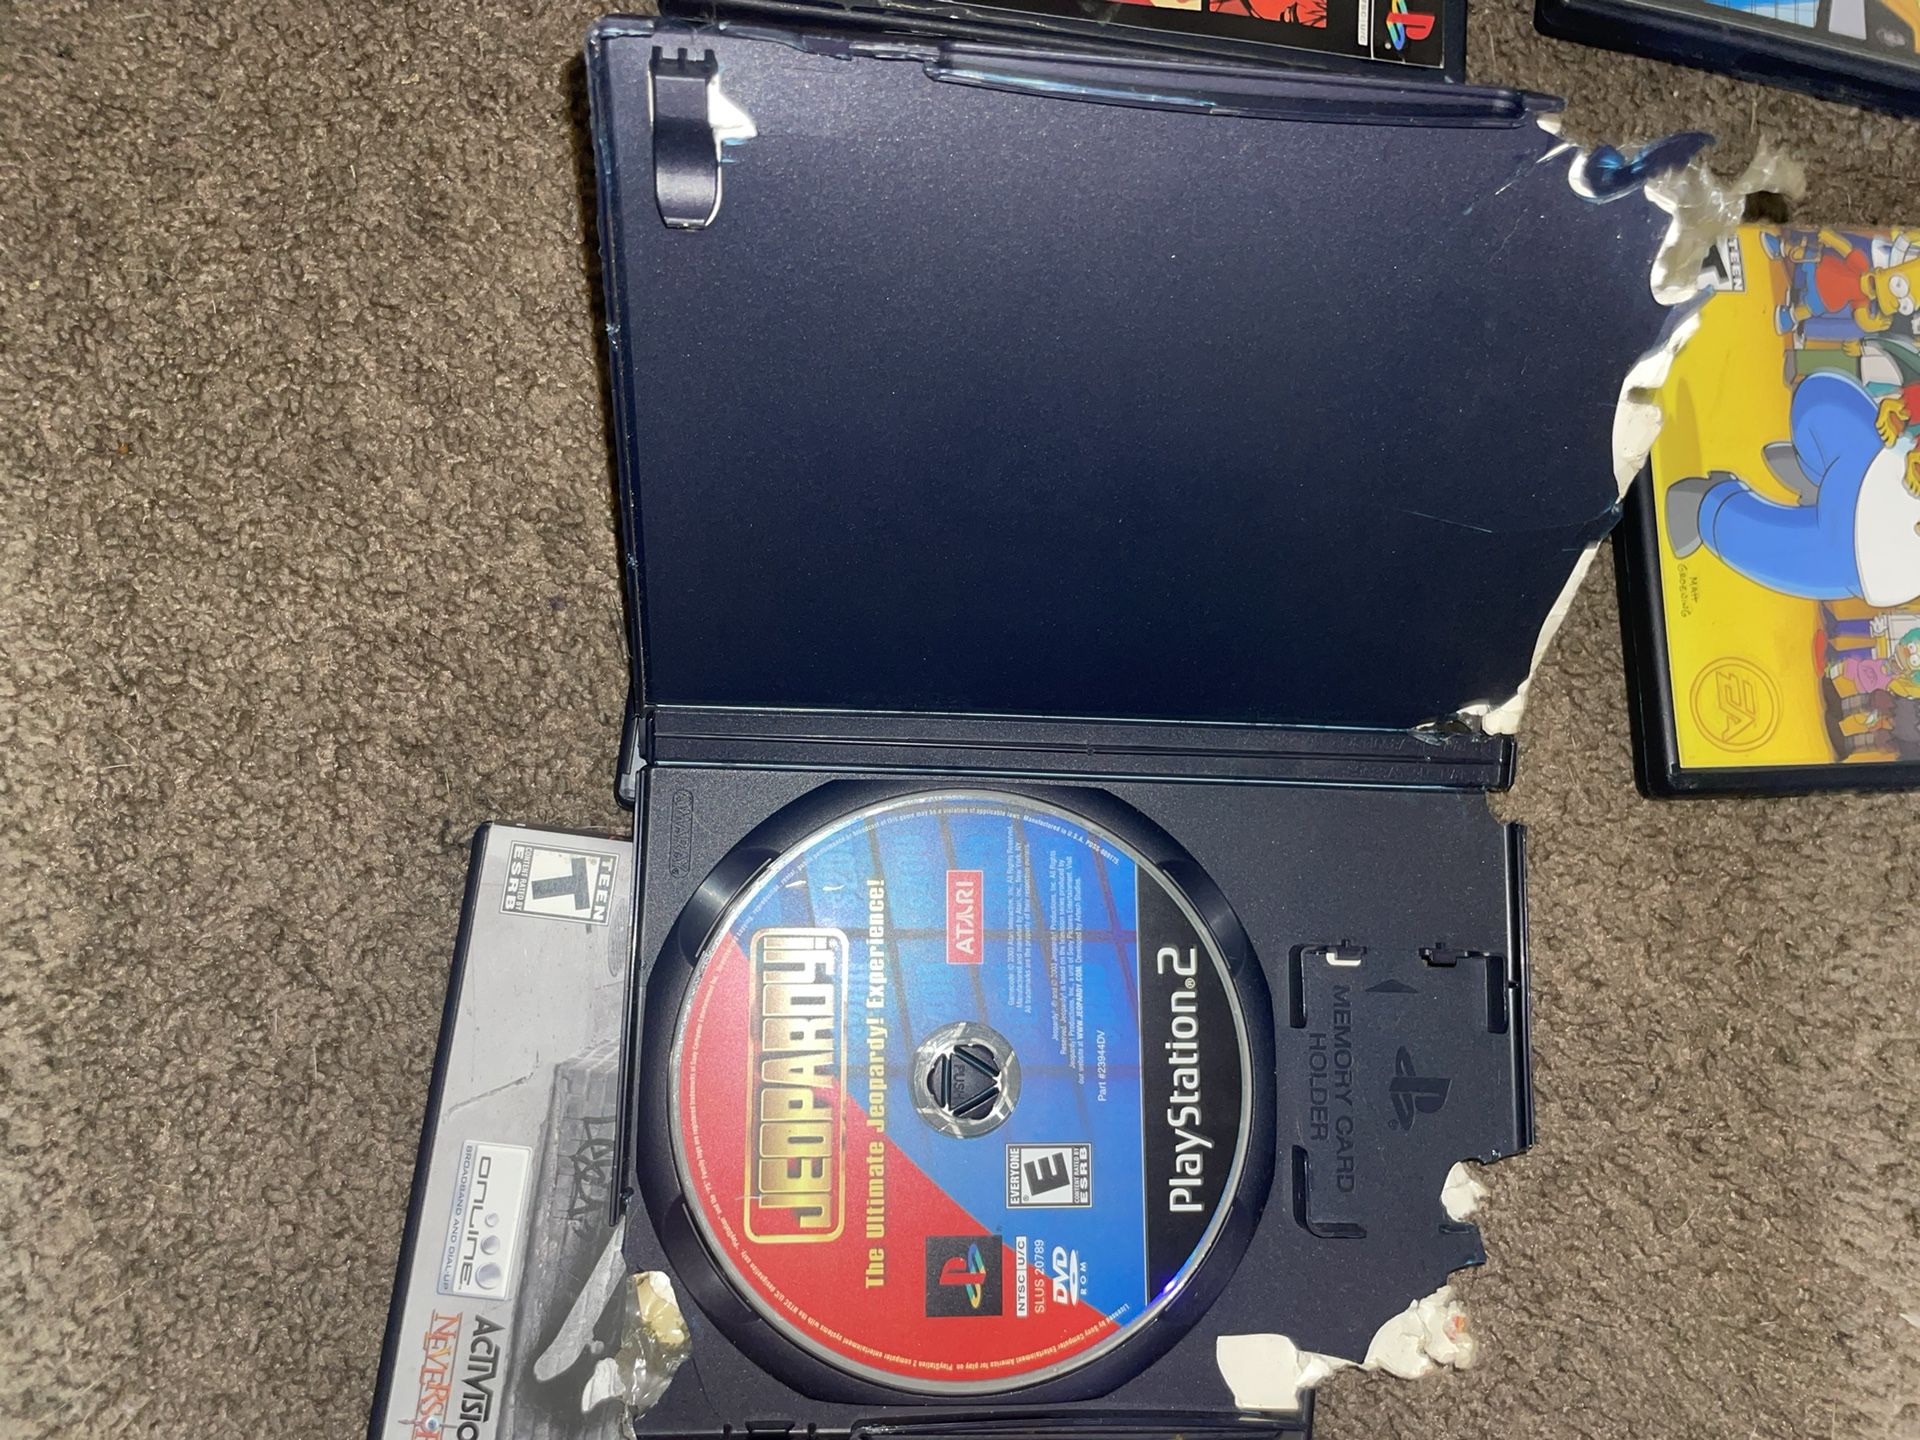 PS2 Splinter Cell for Sale in Worcester, MA - OfferUp